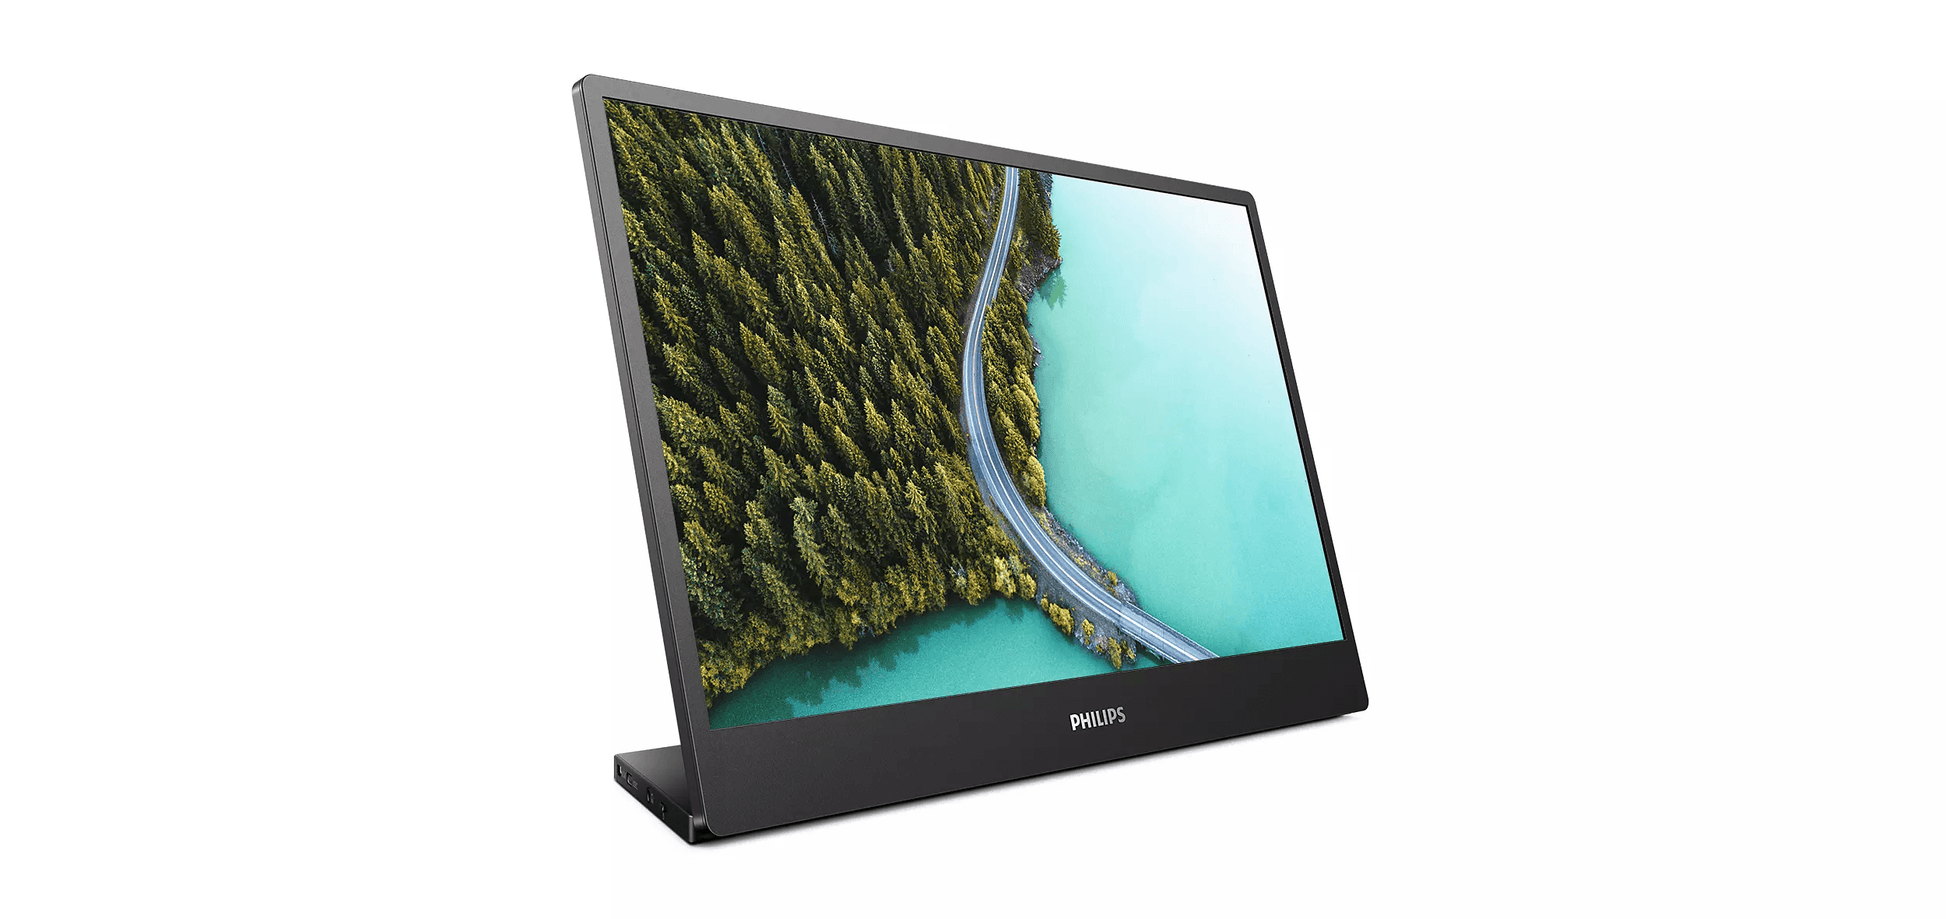 Philips 15.6" Portable Monitor Full HD WLED LCD 16:9 IPS 4ms - Marknet Technology